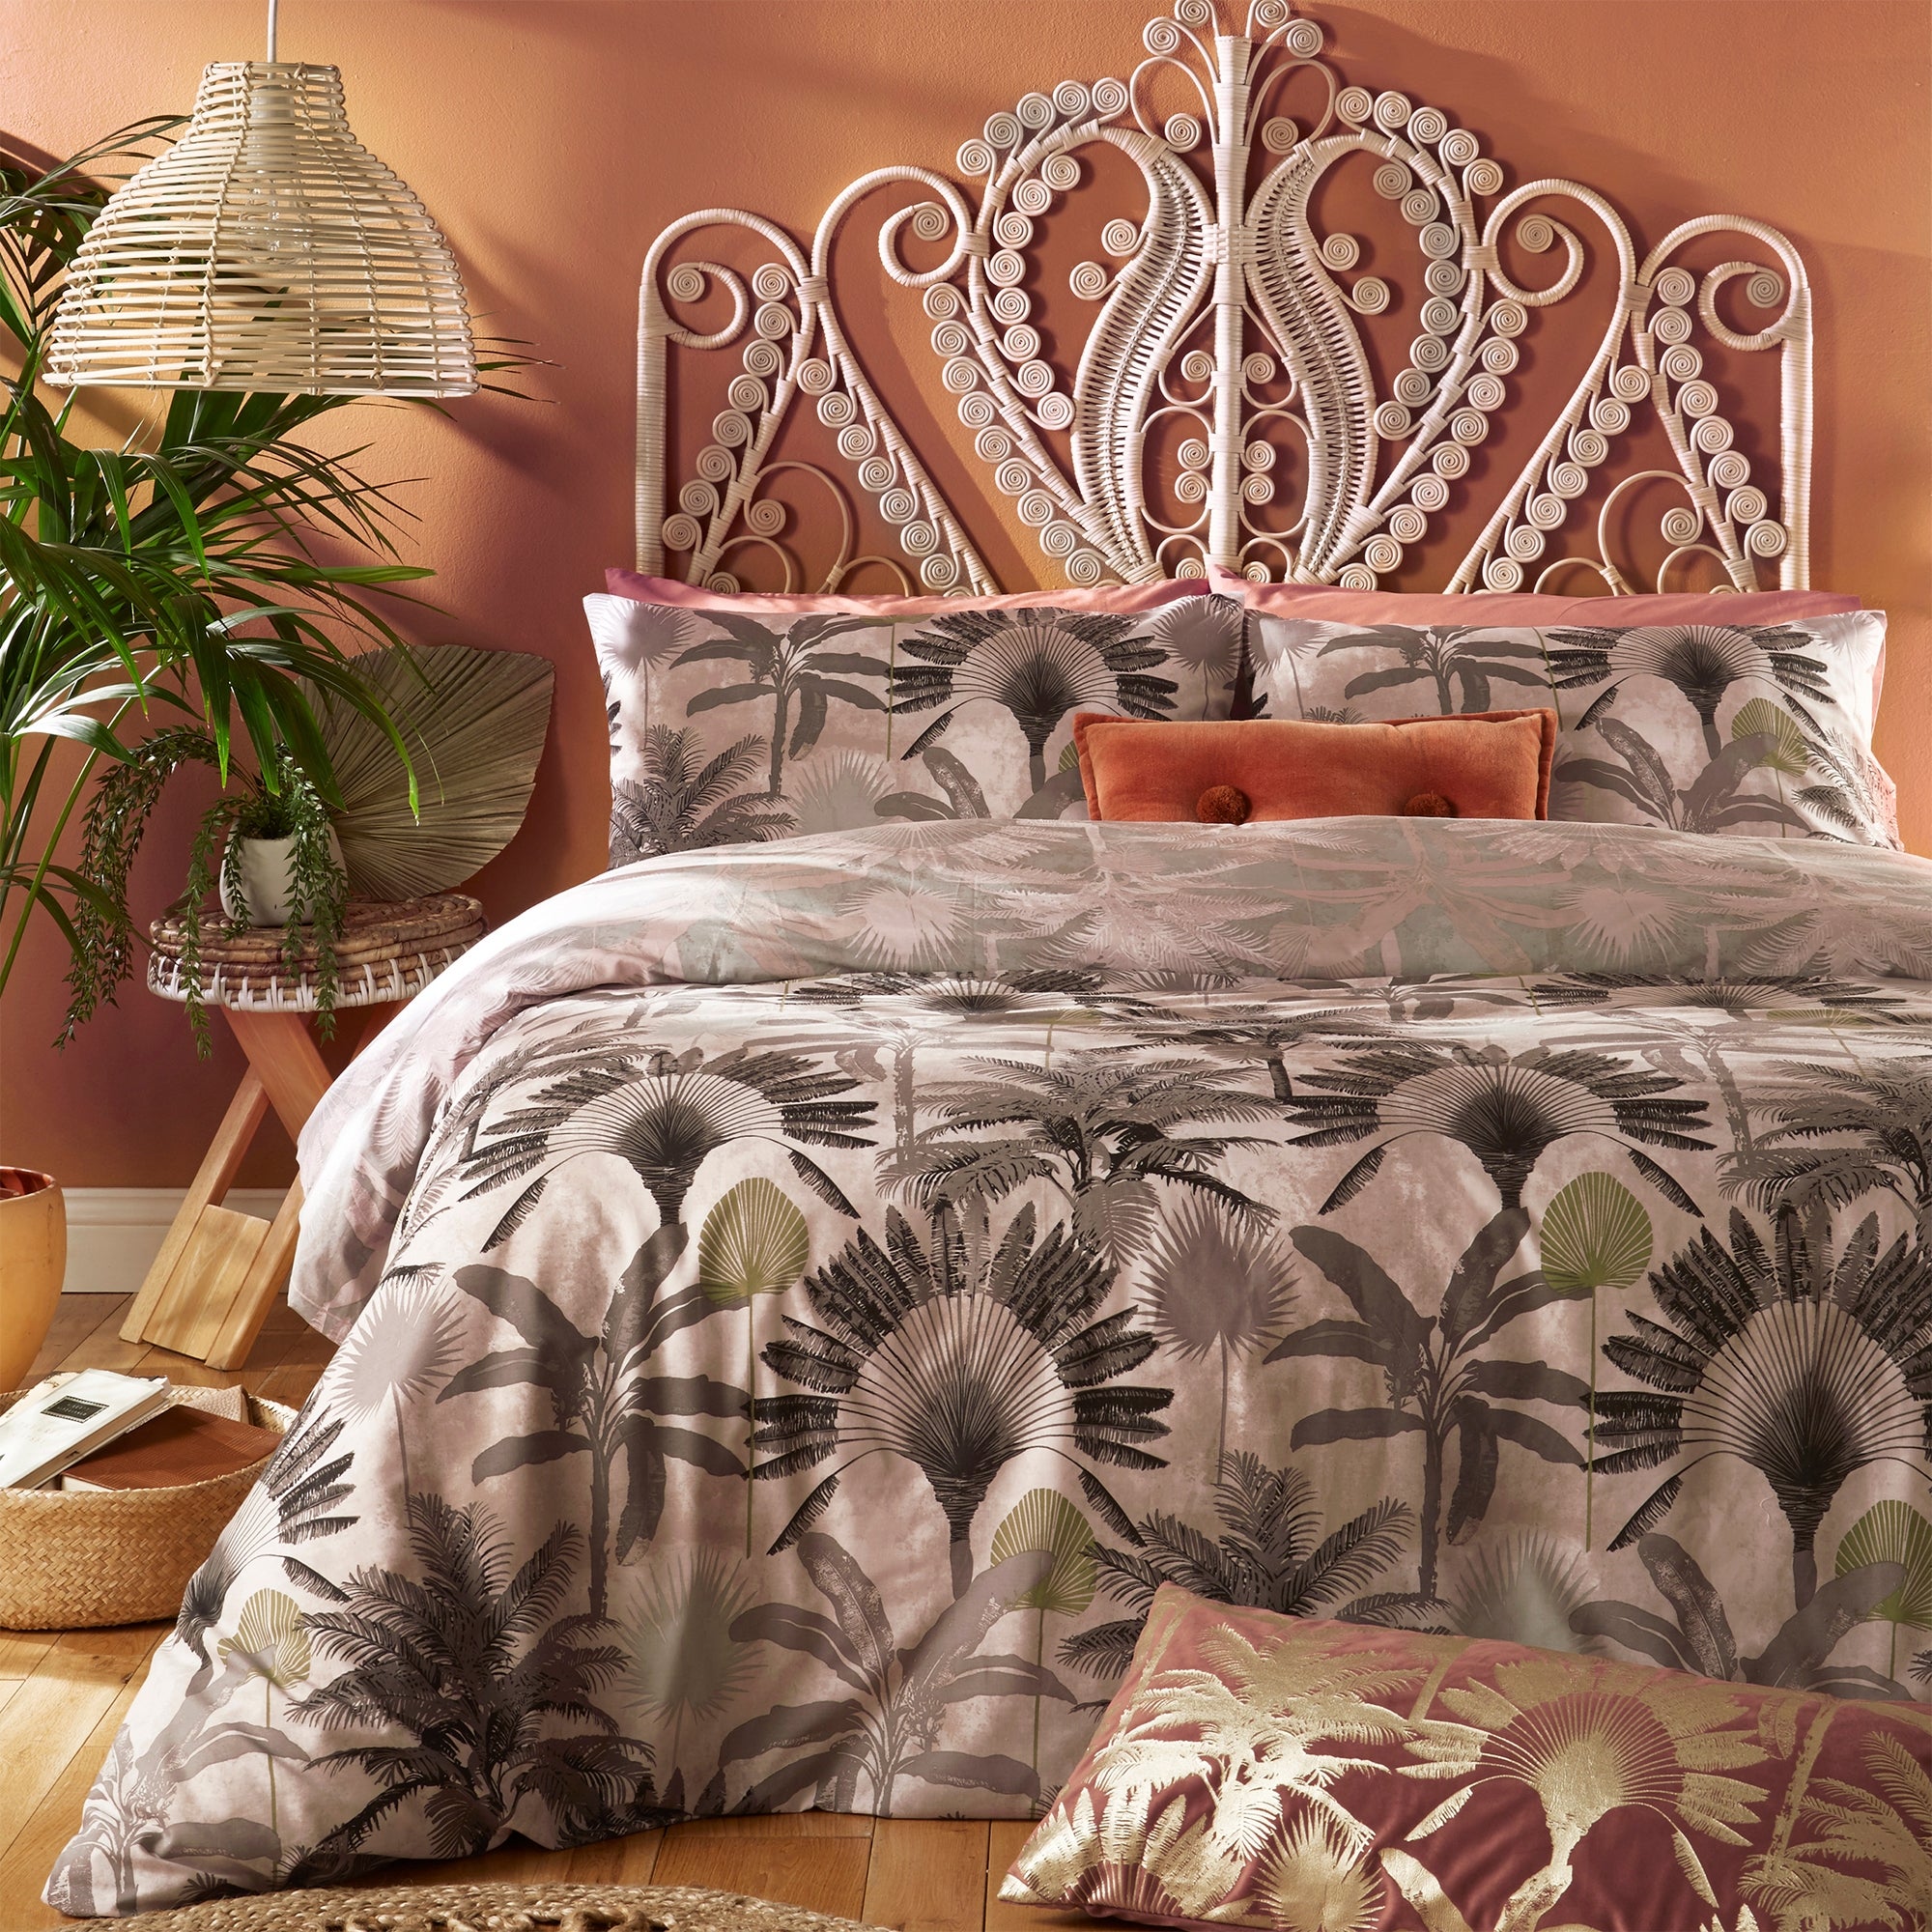 Furn Malaysian Palm Blush Floral Reversible Duvet Cover And Pillowcase Set Beige